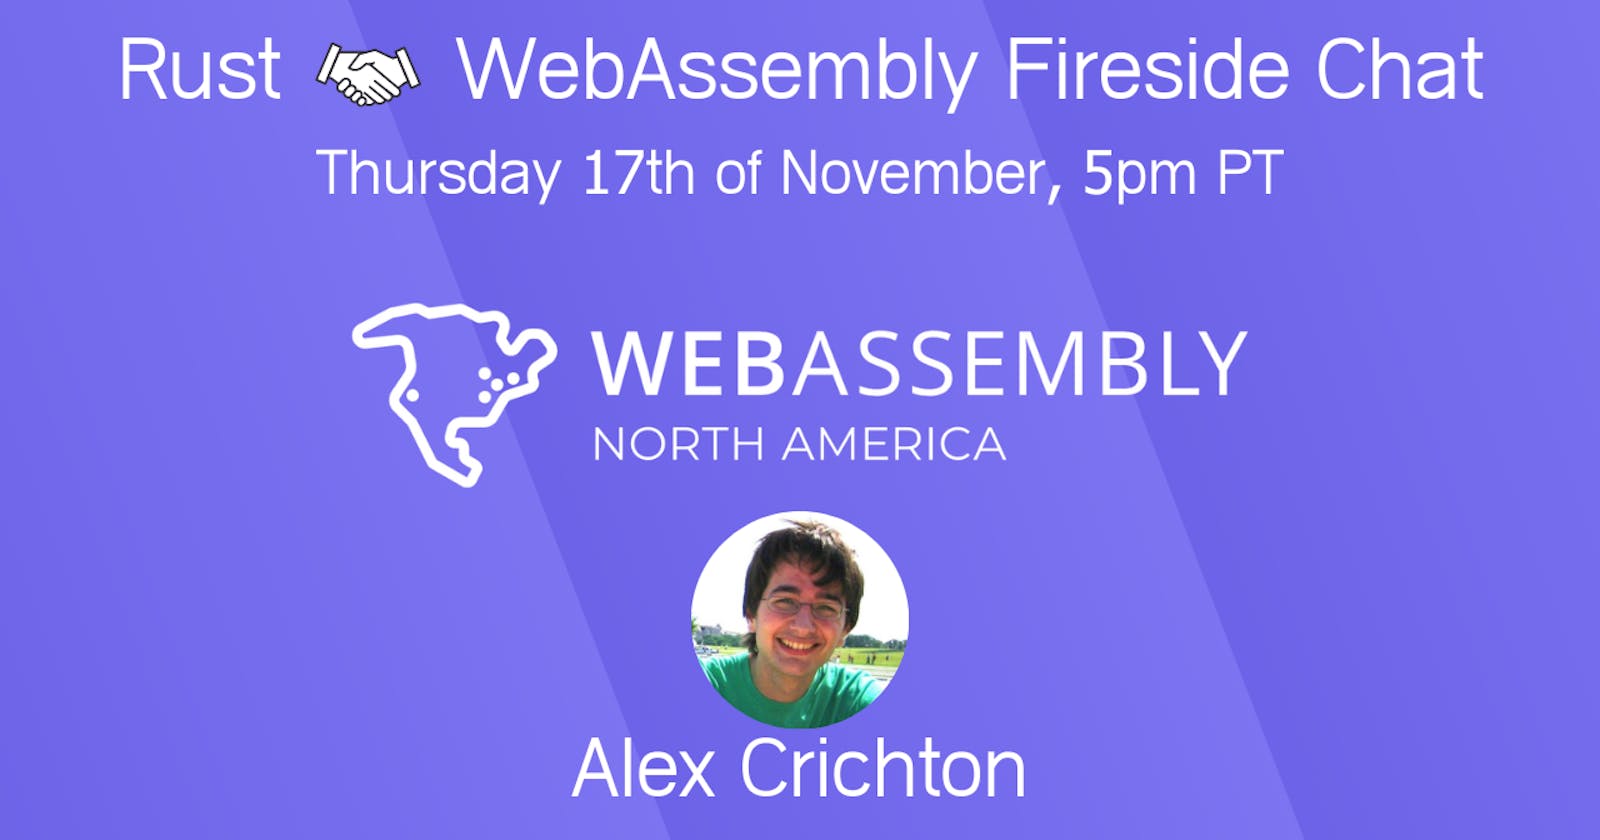 Rust 🤝 WebAssembly with Alex Crichton